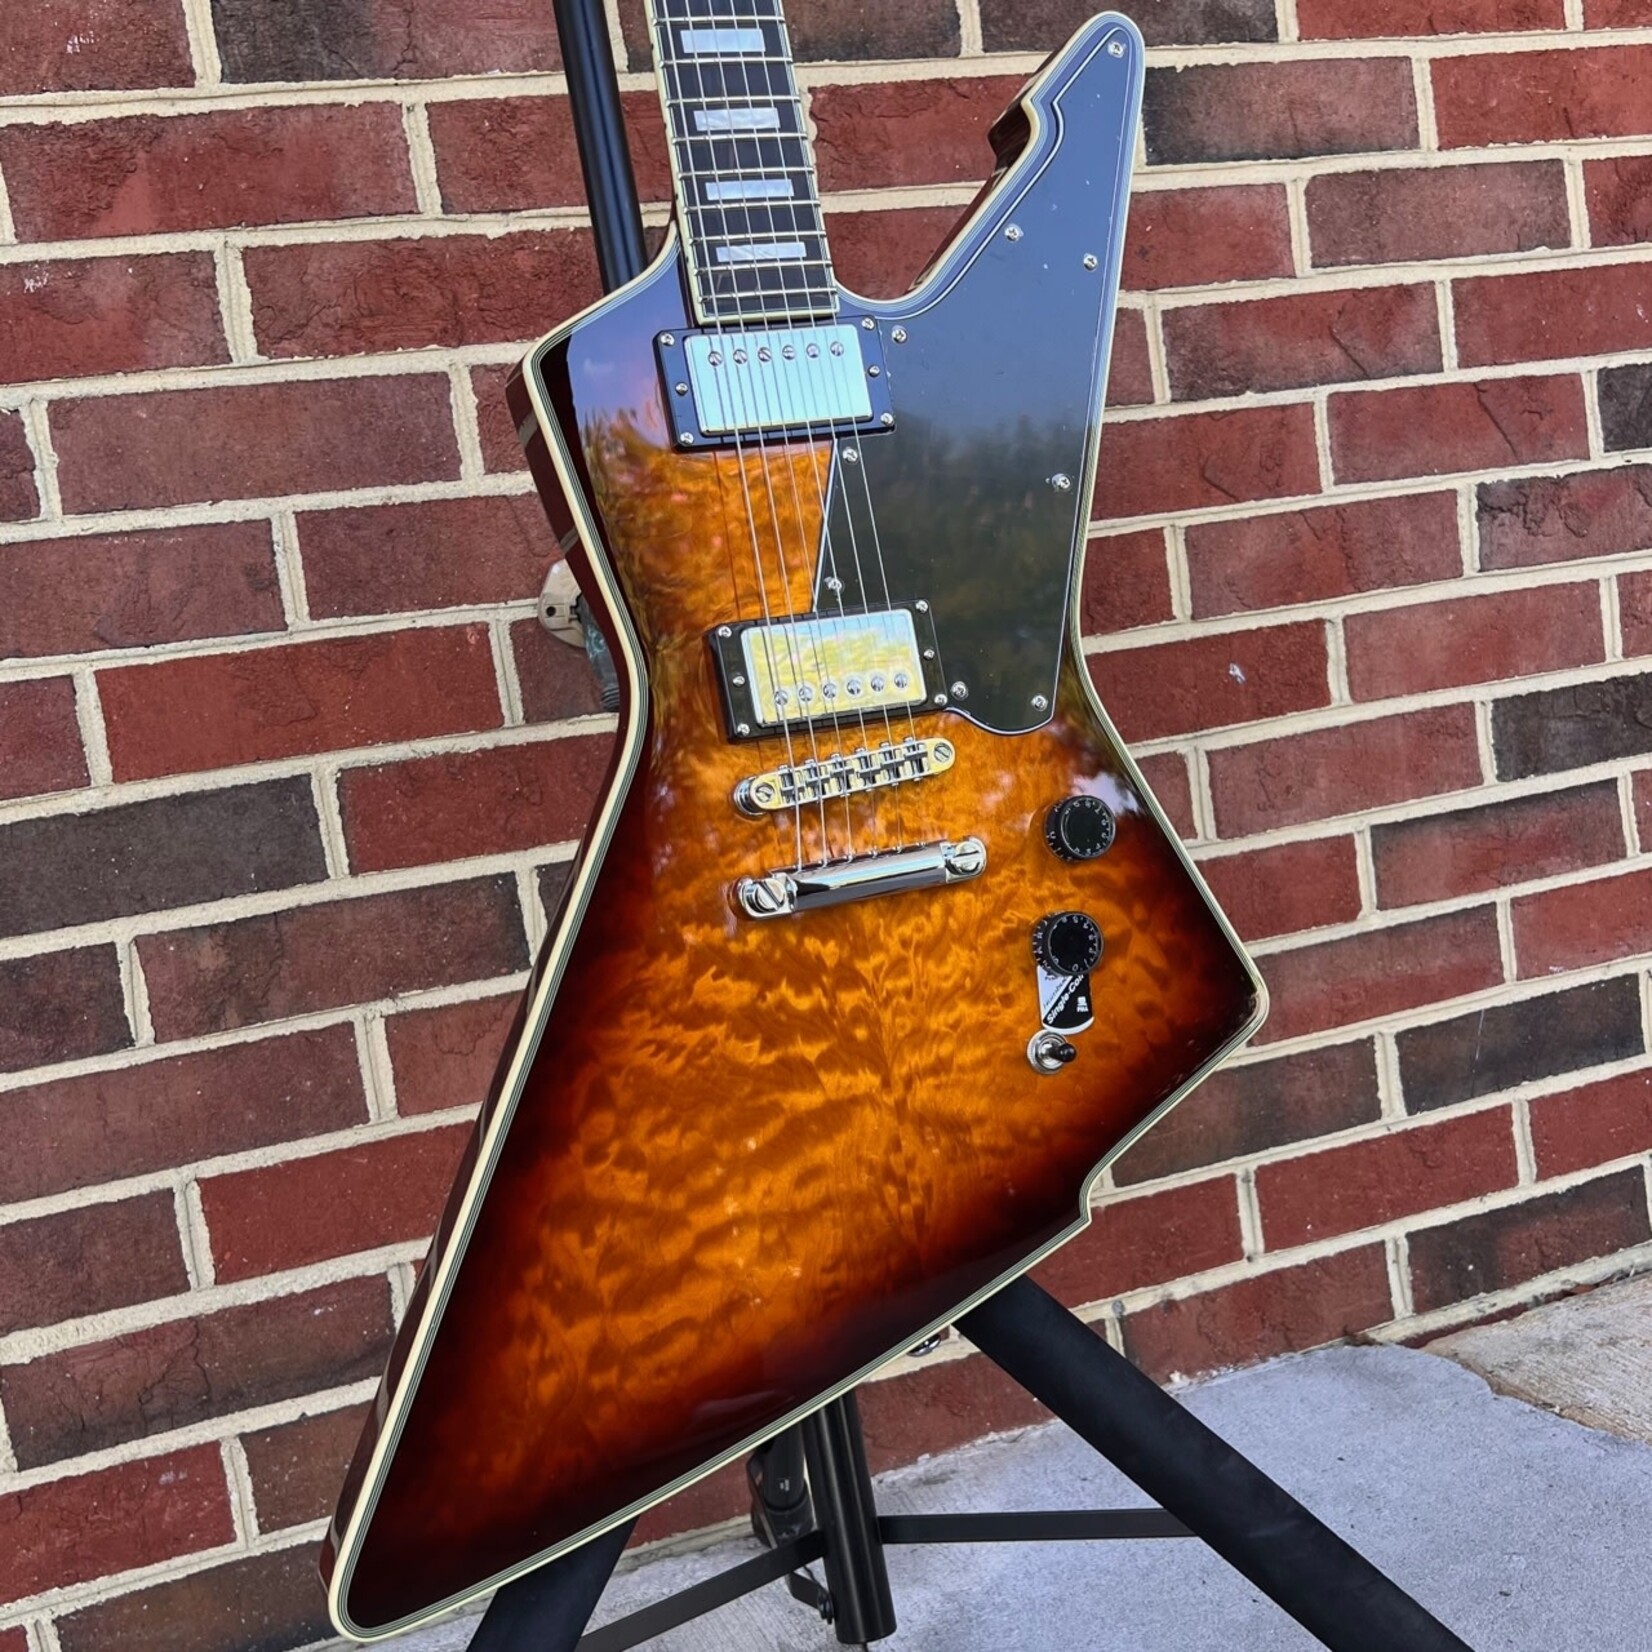 Schecter Guitar Research Schecter E-1 Custom, Vintage Sunburst, Quilted Maple Top, Ebony Fretboard, Locking Tuners, Schecter USA Sunset Strip/Pasadena Pickups, SN# W23051923